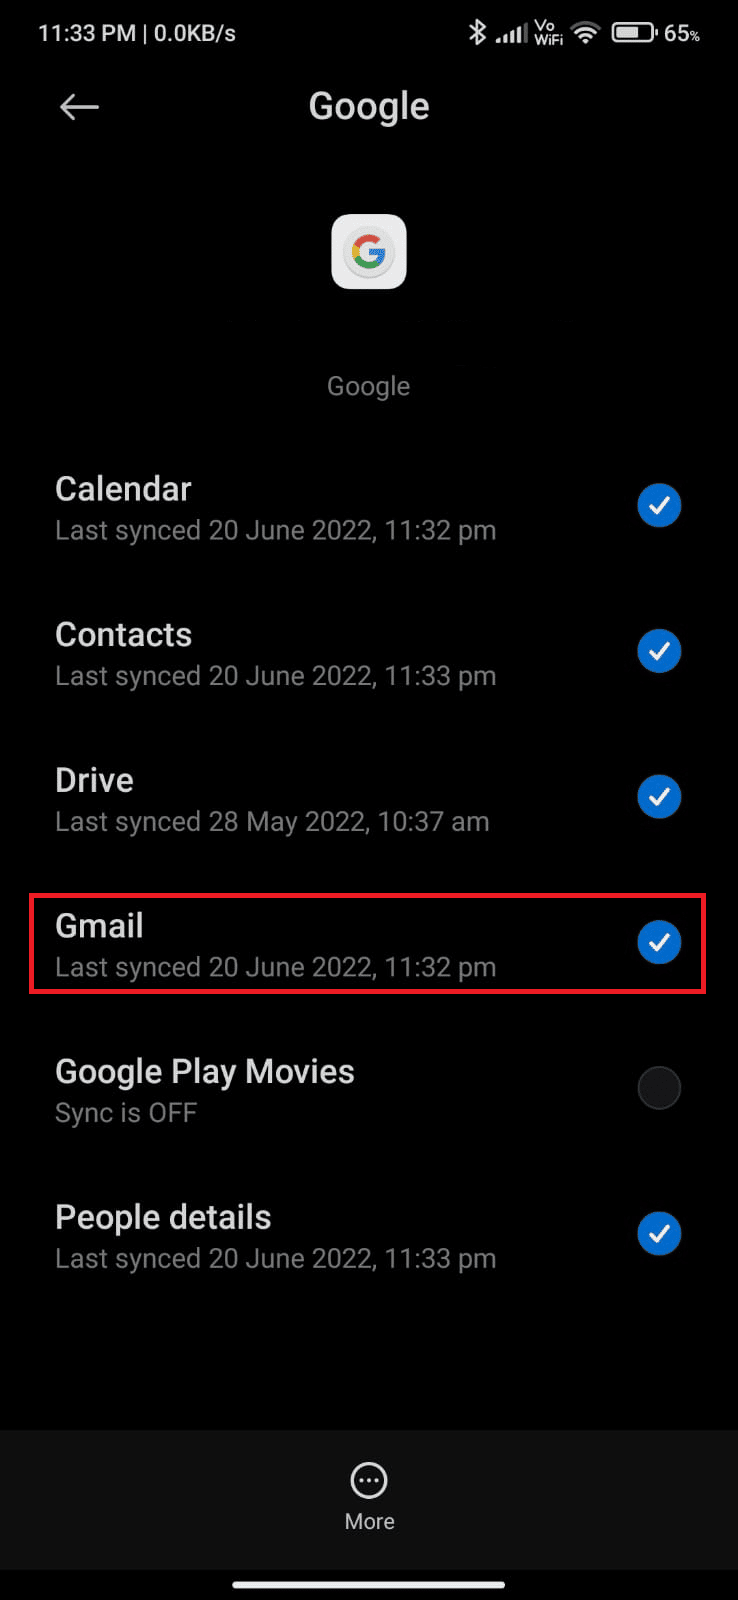 Now, wait for some time and again tap on Gmail.